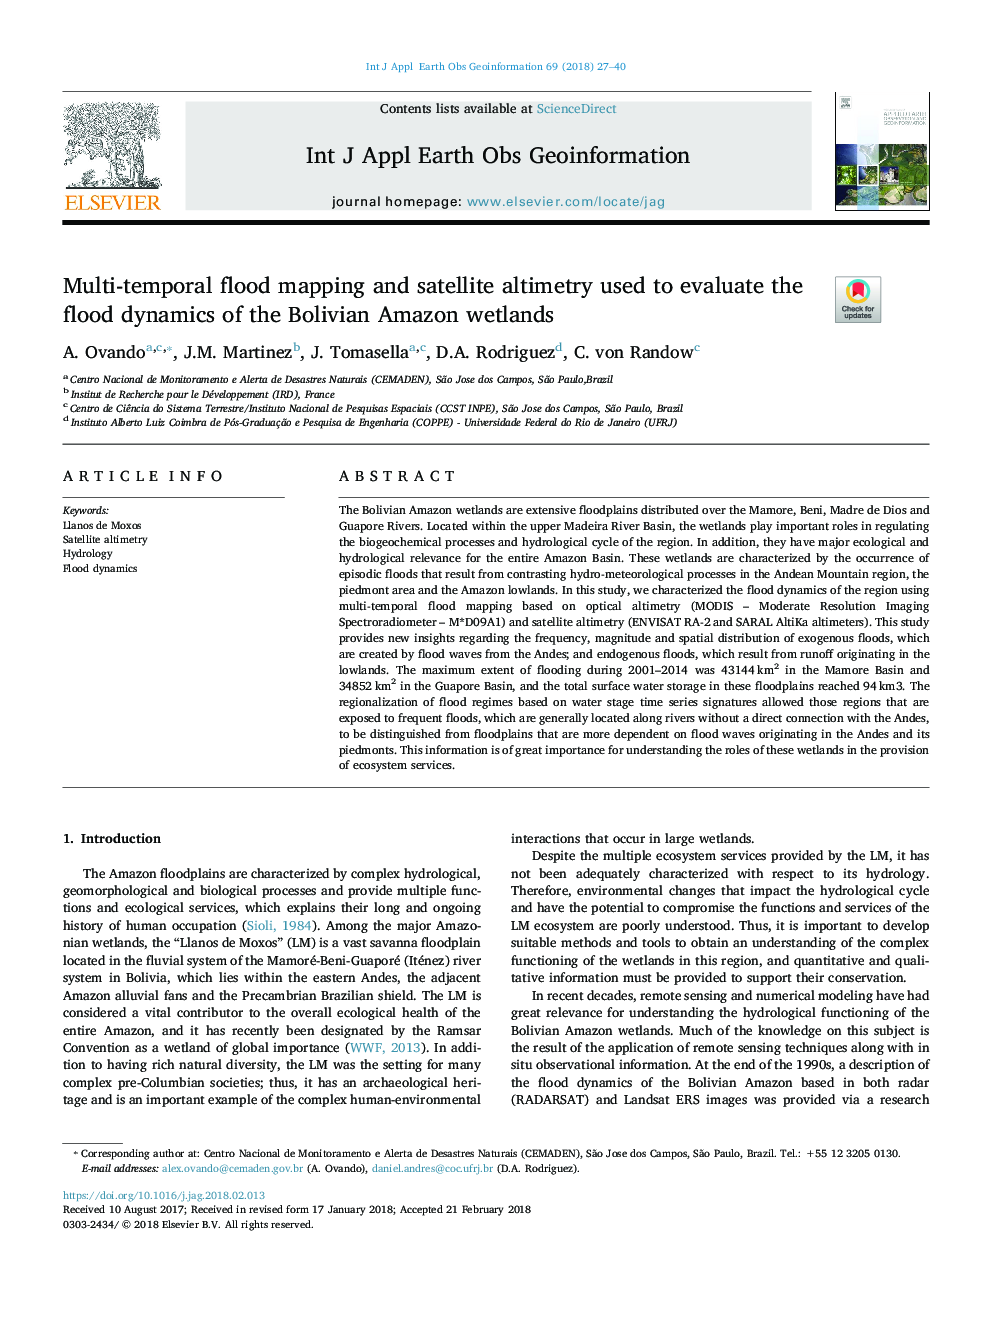 Multi-temporal flood mapping and satellite altimetry used to evaluate the flood dynamics of the Bolivian Amazon wetlands